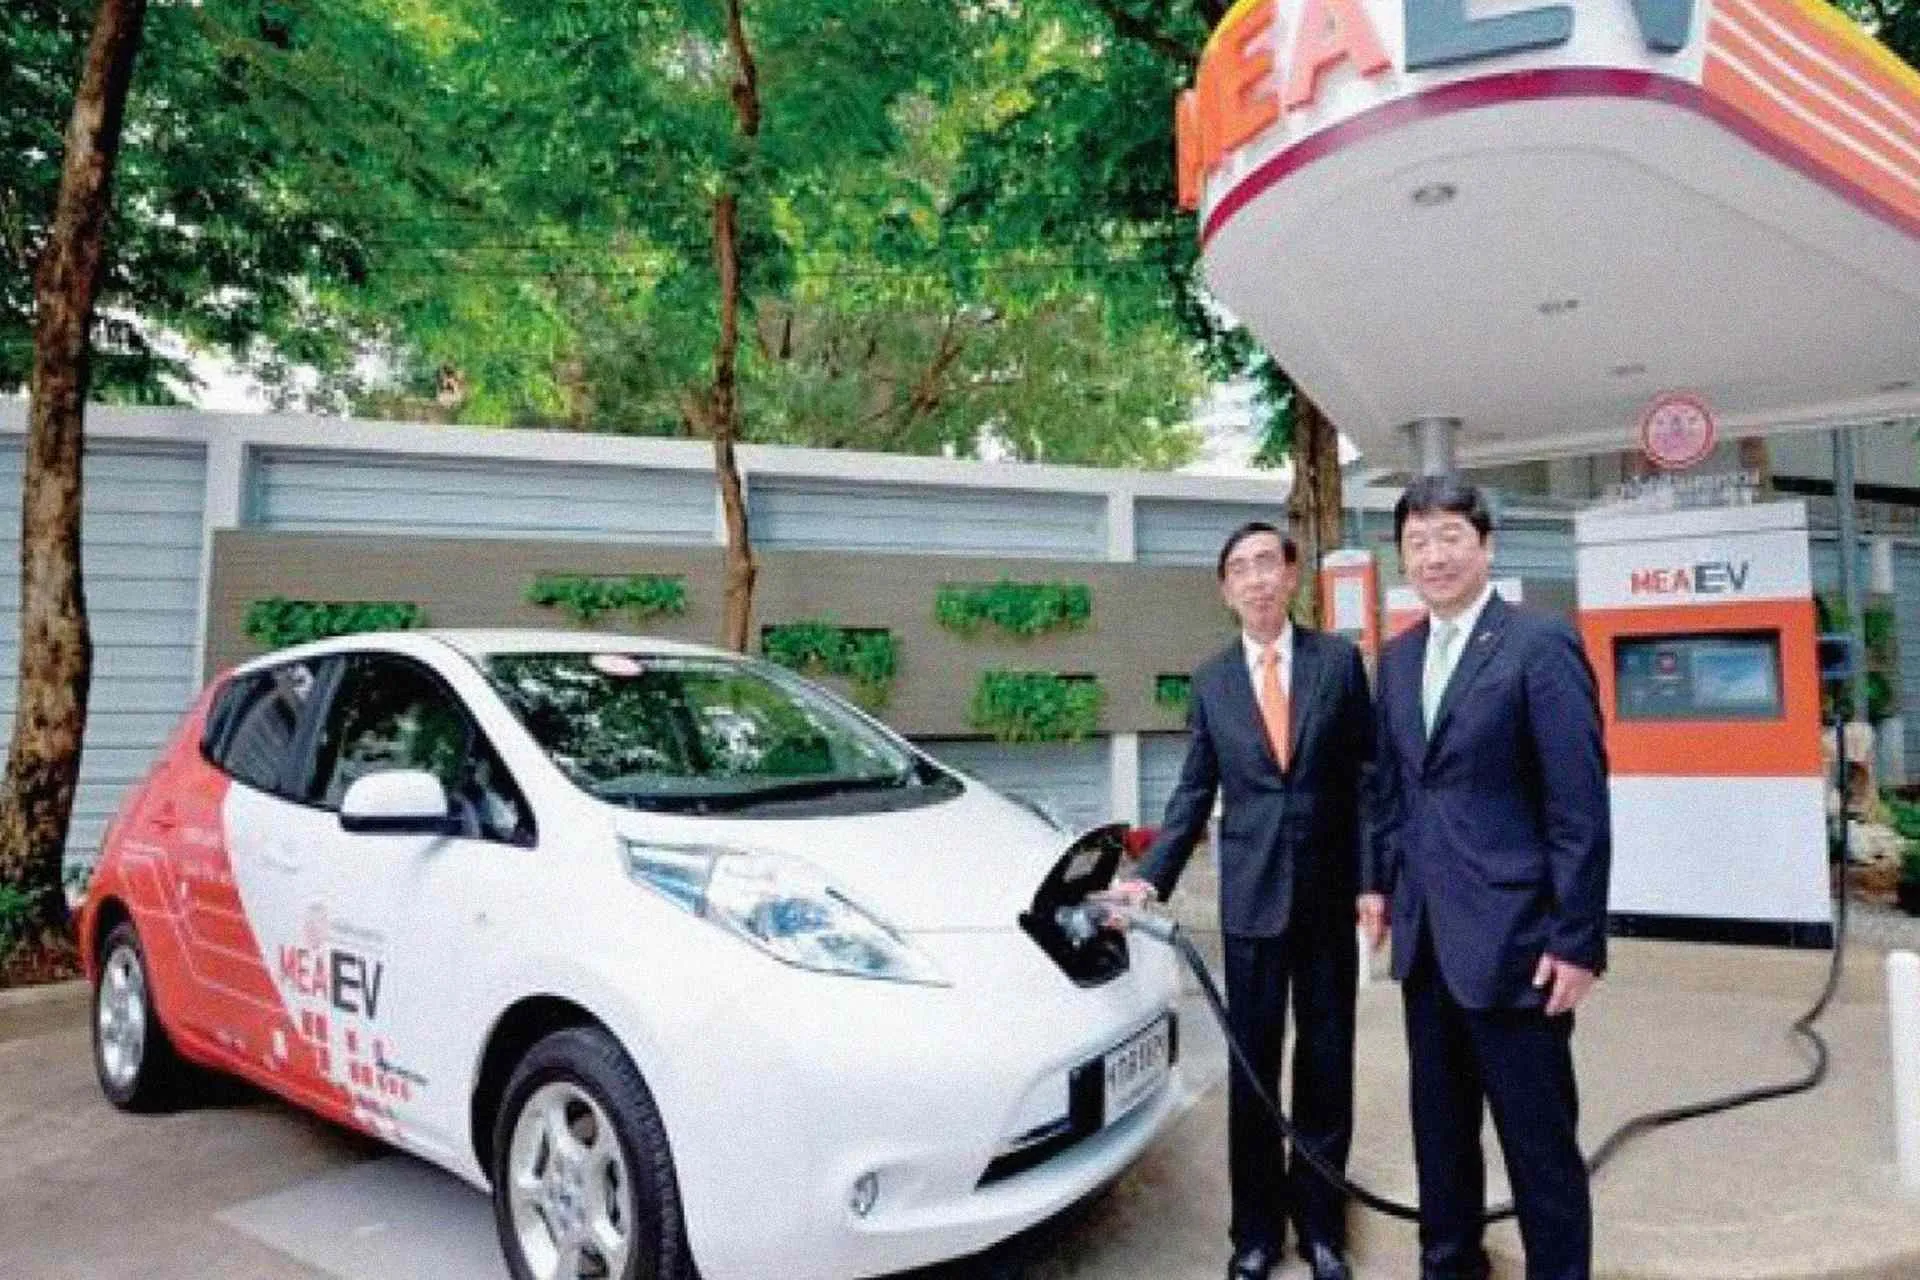 the accumulated number of EV registrations in Thailand for Battery Electric Vehicles and Plug-in Hybrid Electric Vehicles sharply increased from 2016 to 2017.